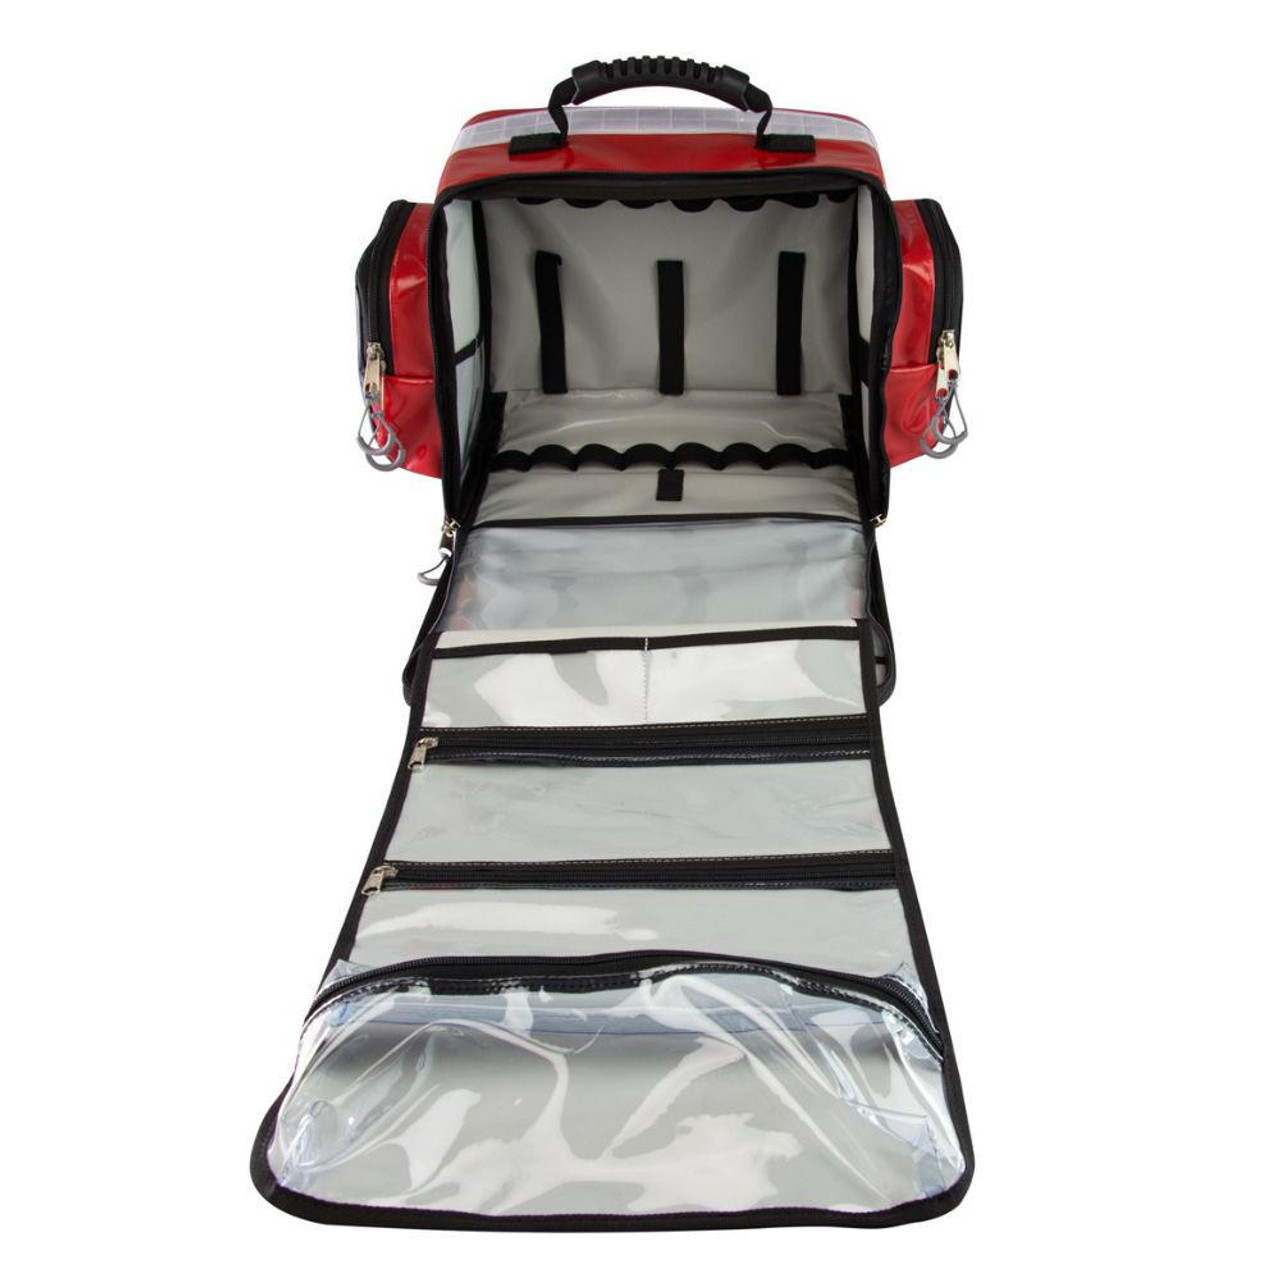 FAK5011 Aerocase First Aid Medical Bag Wall Mounted Drop Down Fold Out Style Red Wipe Clean PVC   HT13-ABL1-R